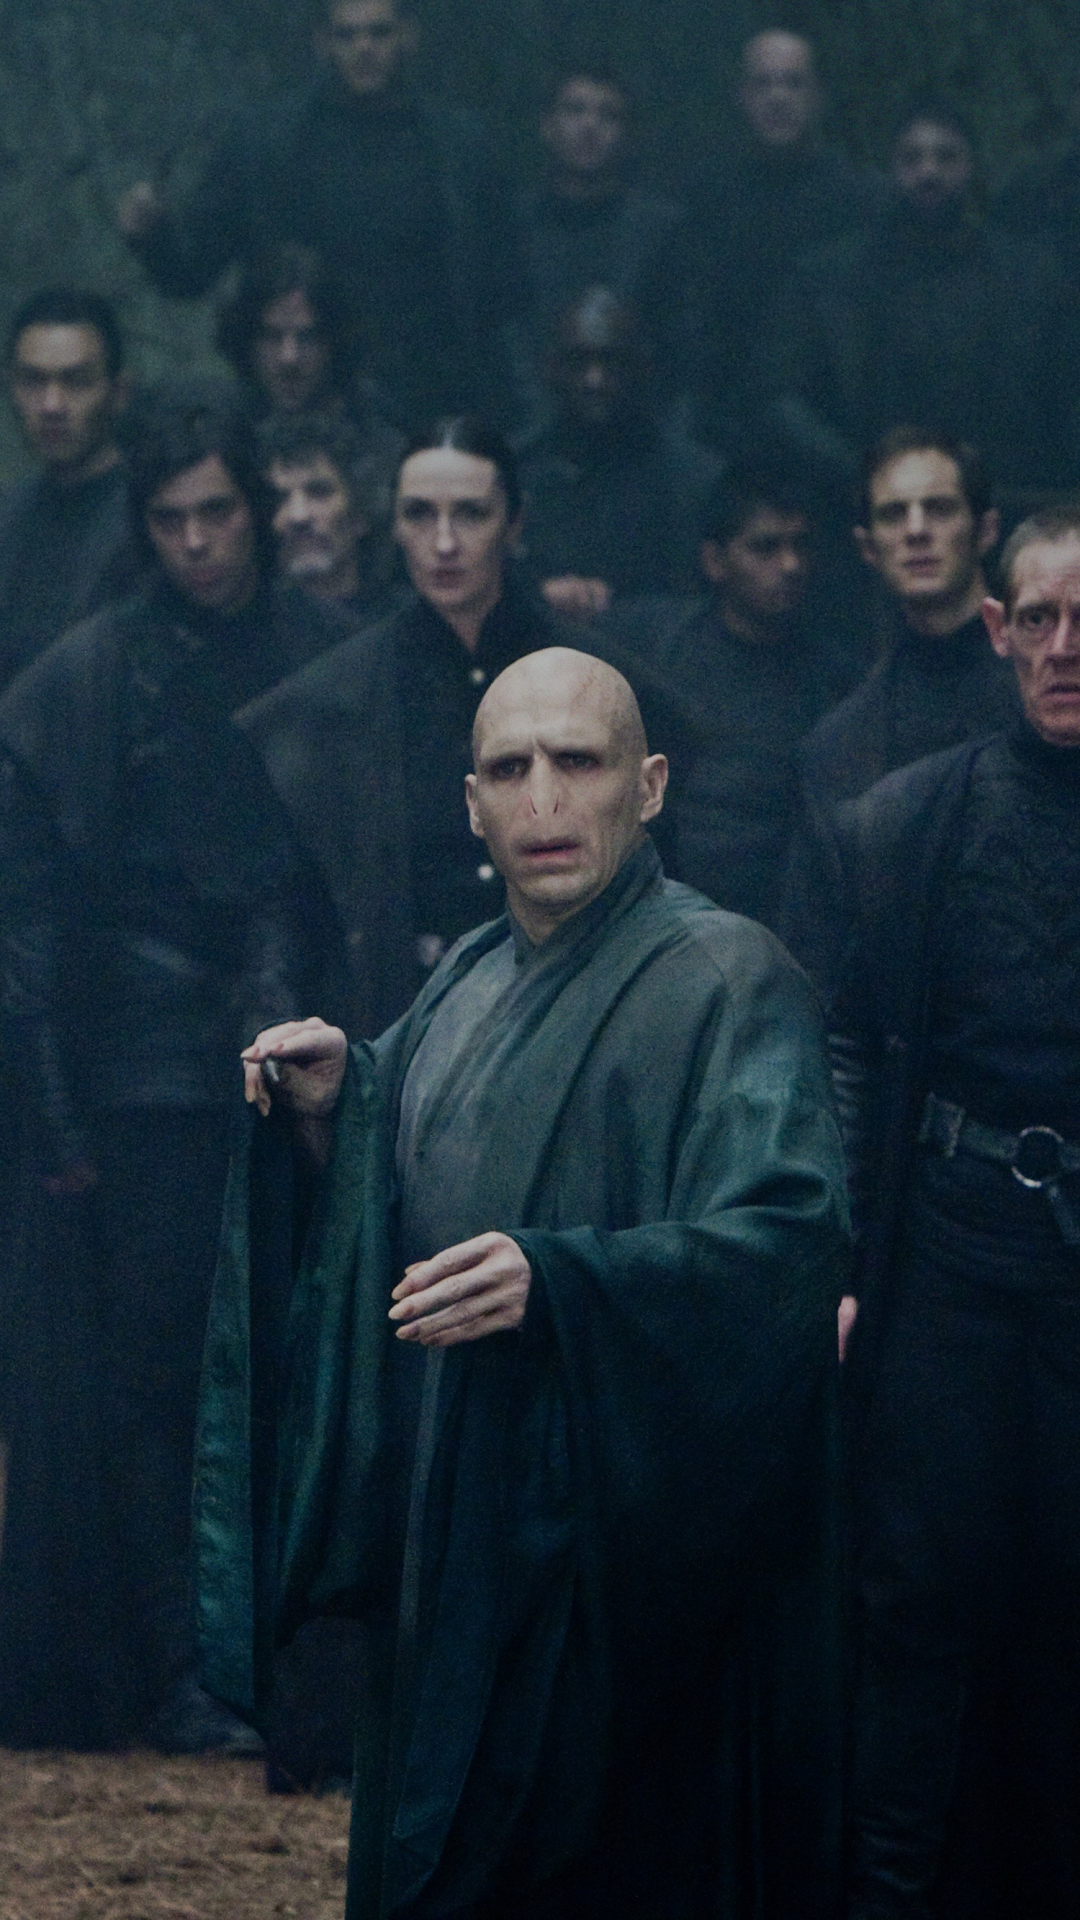 movie, harry potter and the deathly hallows: part 2, lord voldemort, harry potter